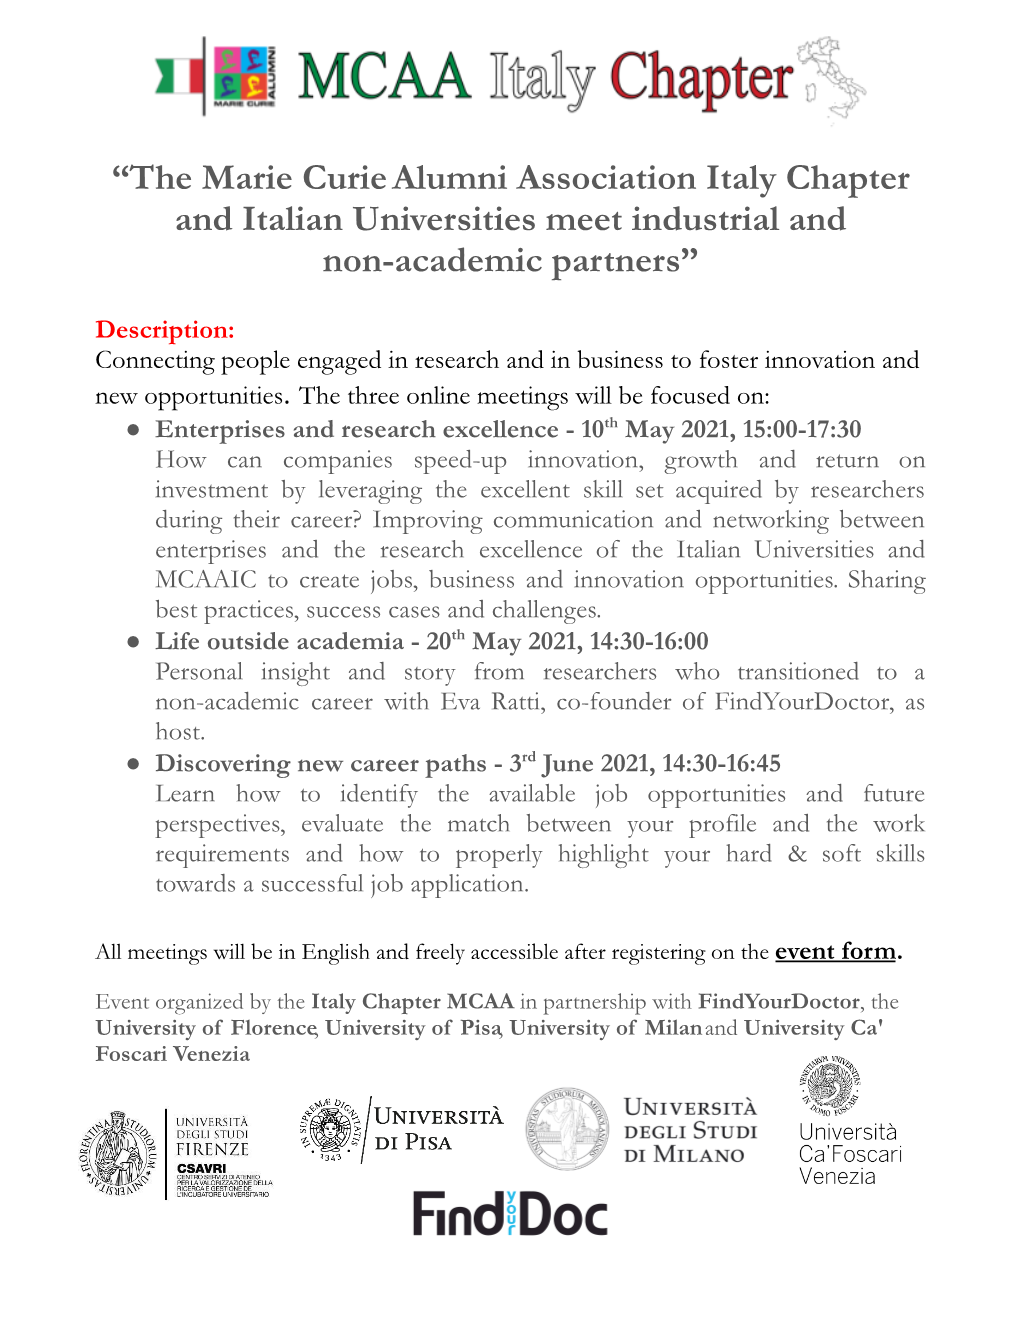 The Marie Curiealumni Association Italy Chapter and Italian